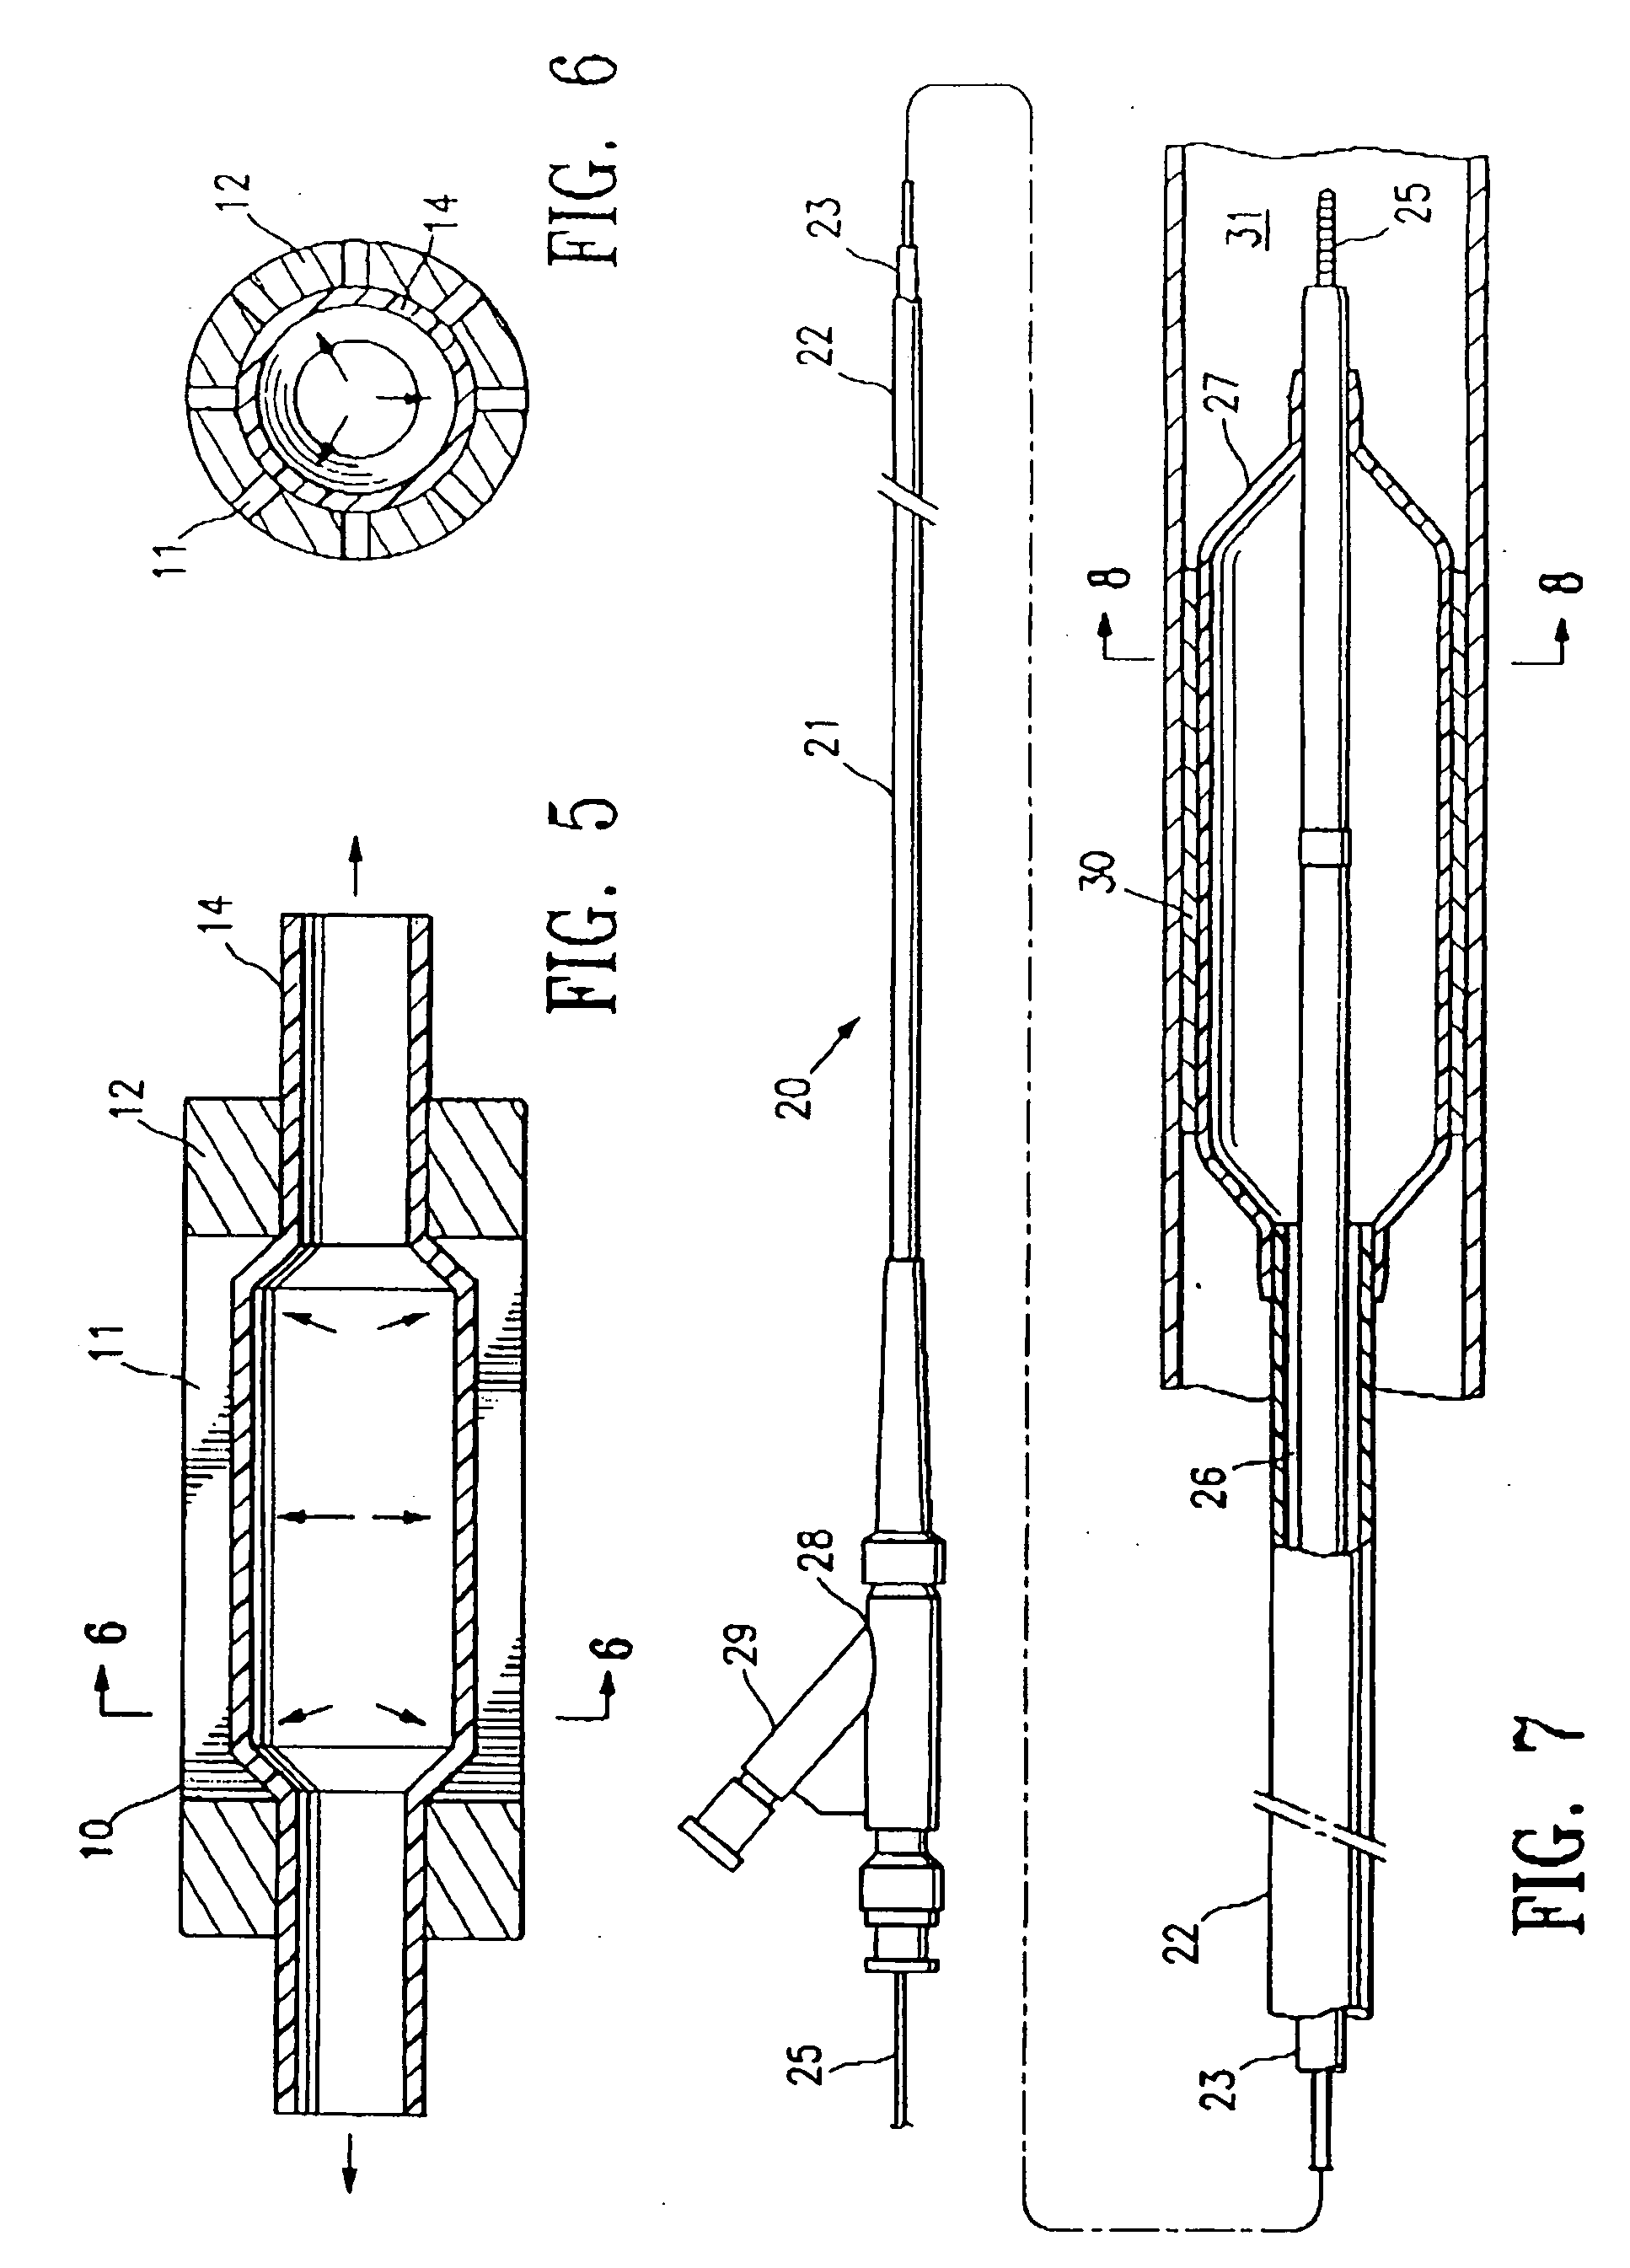 Slotted mold for making a balloon catheter